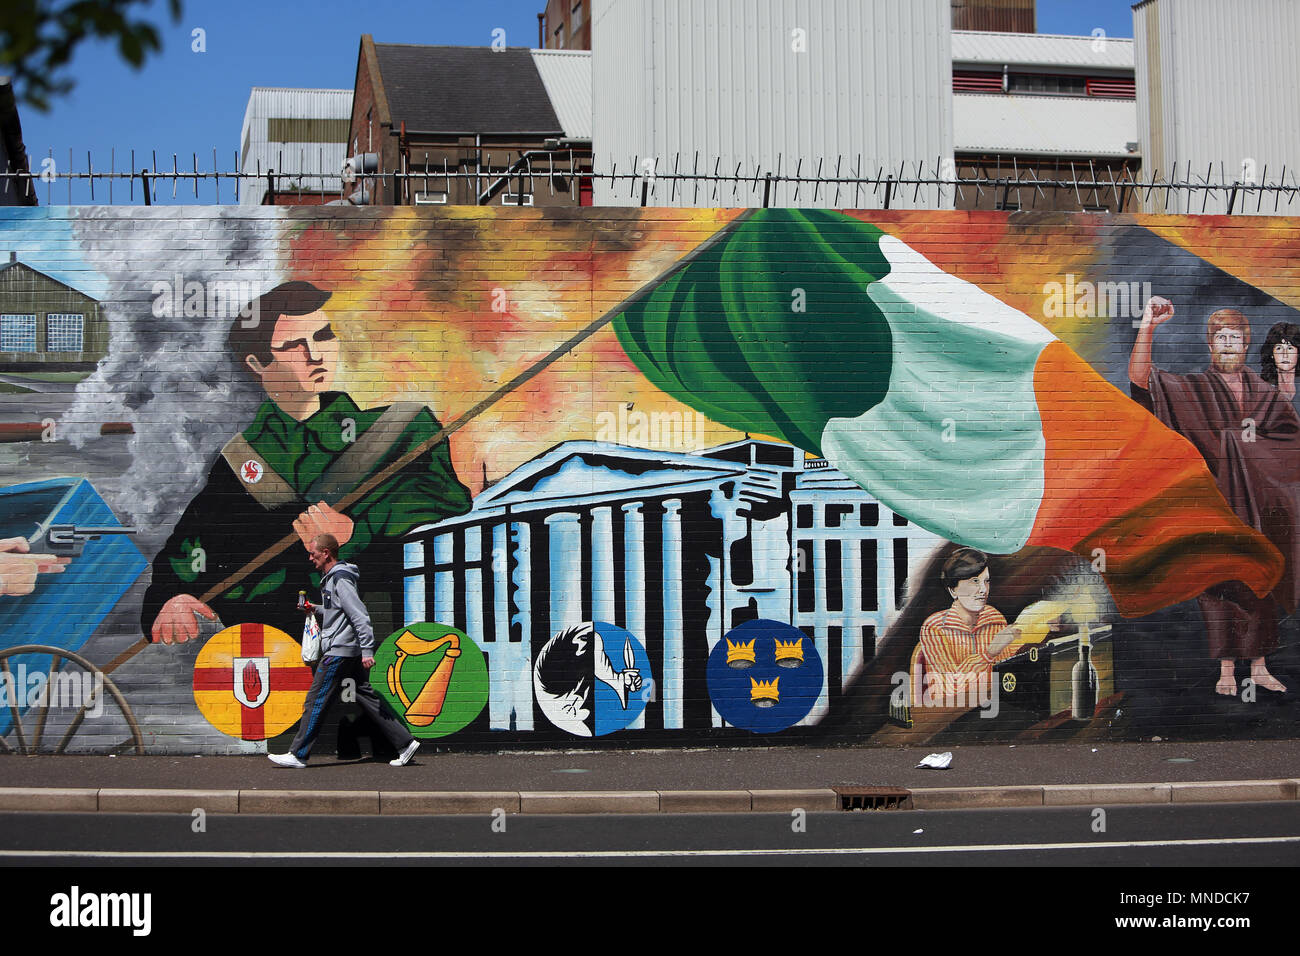 A man walks past the international peace wall on the Falls Road, west Belfast, May 2018. The Falls Road (from Irish túath na bhFál, meaning 'territory of the enclosures) is the main road through west Belfast, Northern Ireland, running from Divis Street in Belfast city centre to Andersonstown in the suburbs. Its name is synonymous with the republican community in the city, whilst the neighbouring Shankill Road is predominantly loyalist, separated from the Falls Road by peace lines. The road is usually referred to as the Falls Road, rather than as Falls Road. It is known as the Faas Raa in Ulste Stock Photo